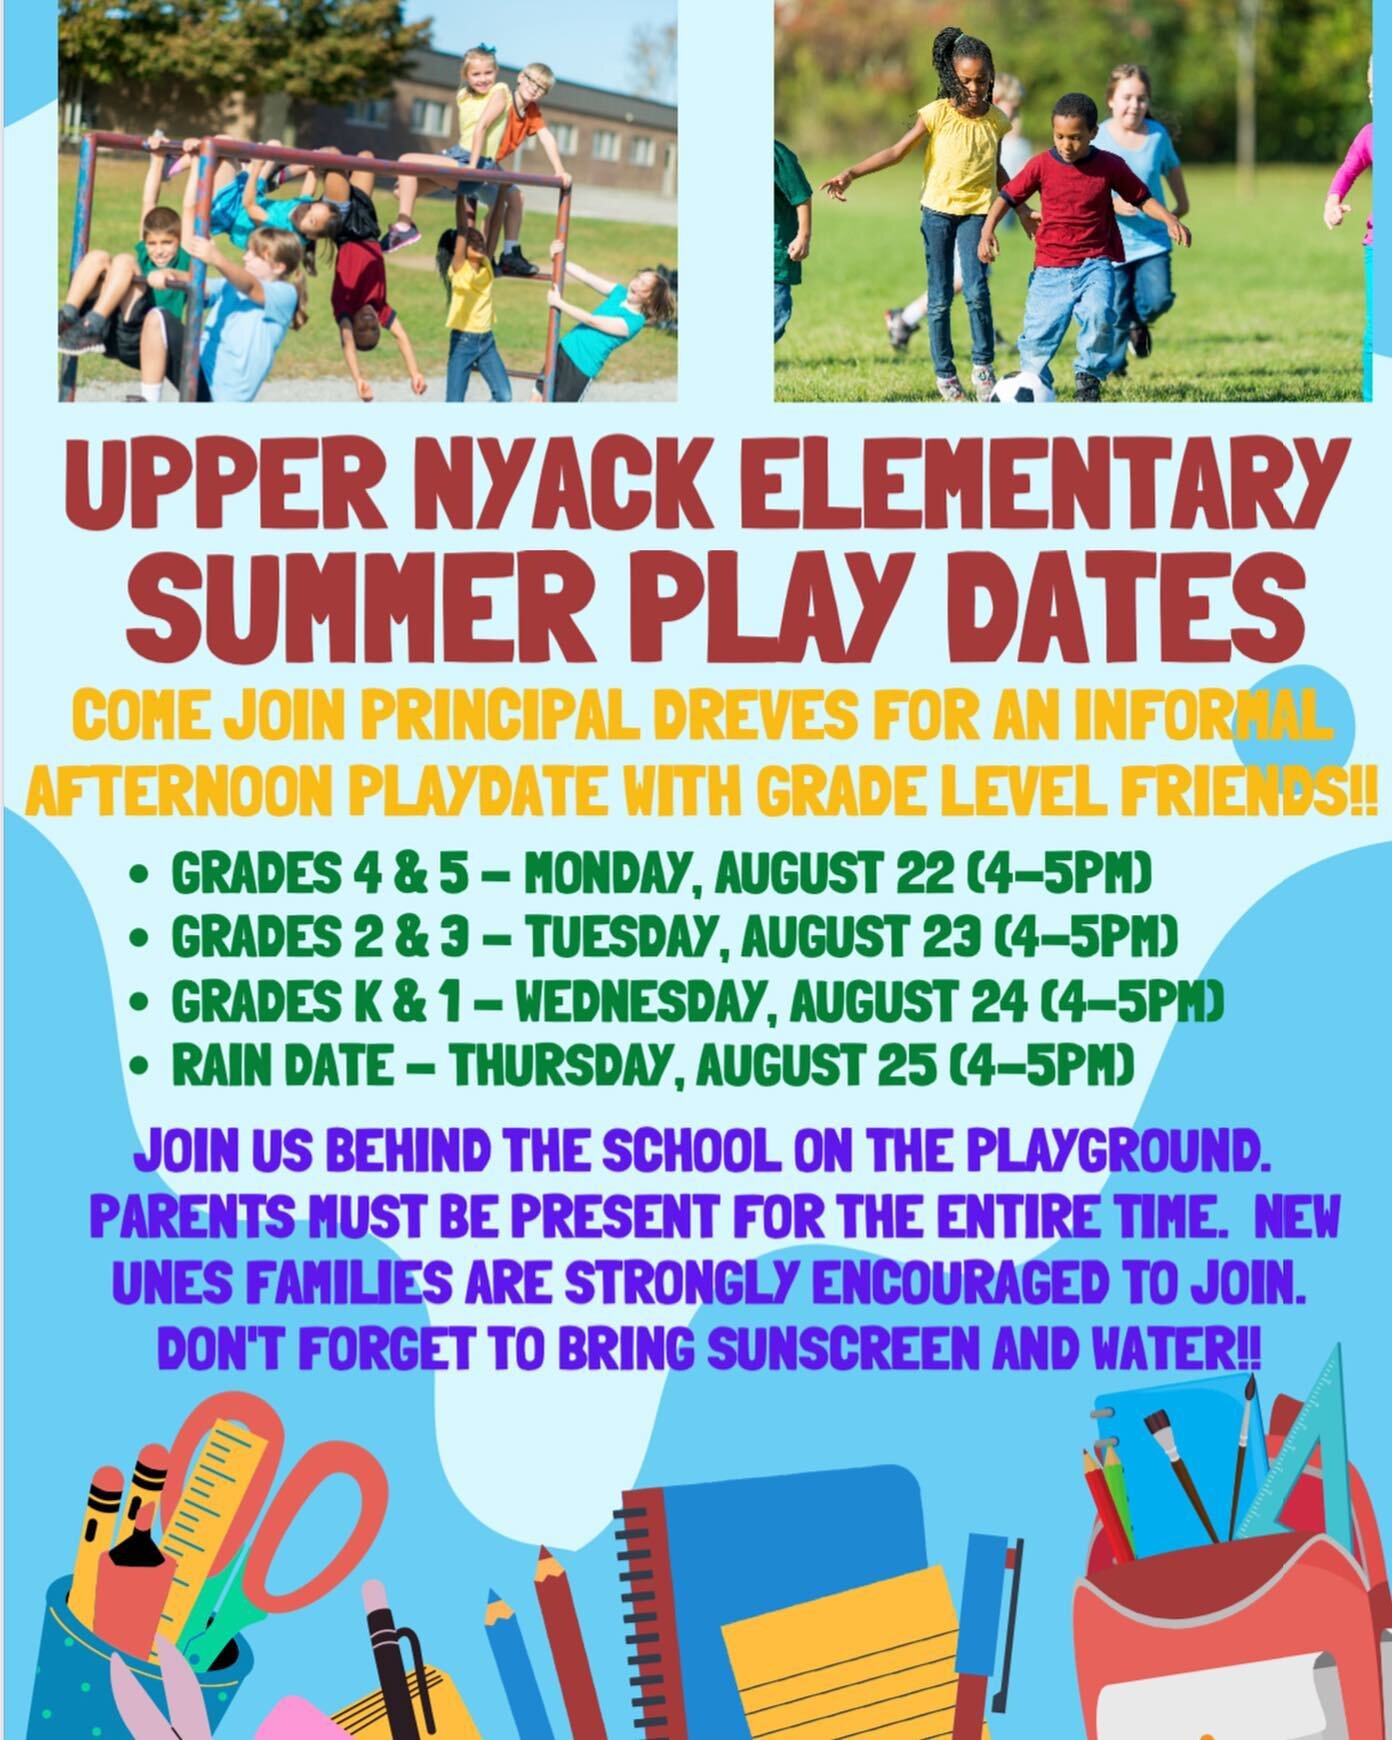 Check out these UNES summer play dates with our Principal Dreves!